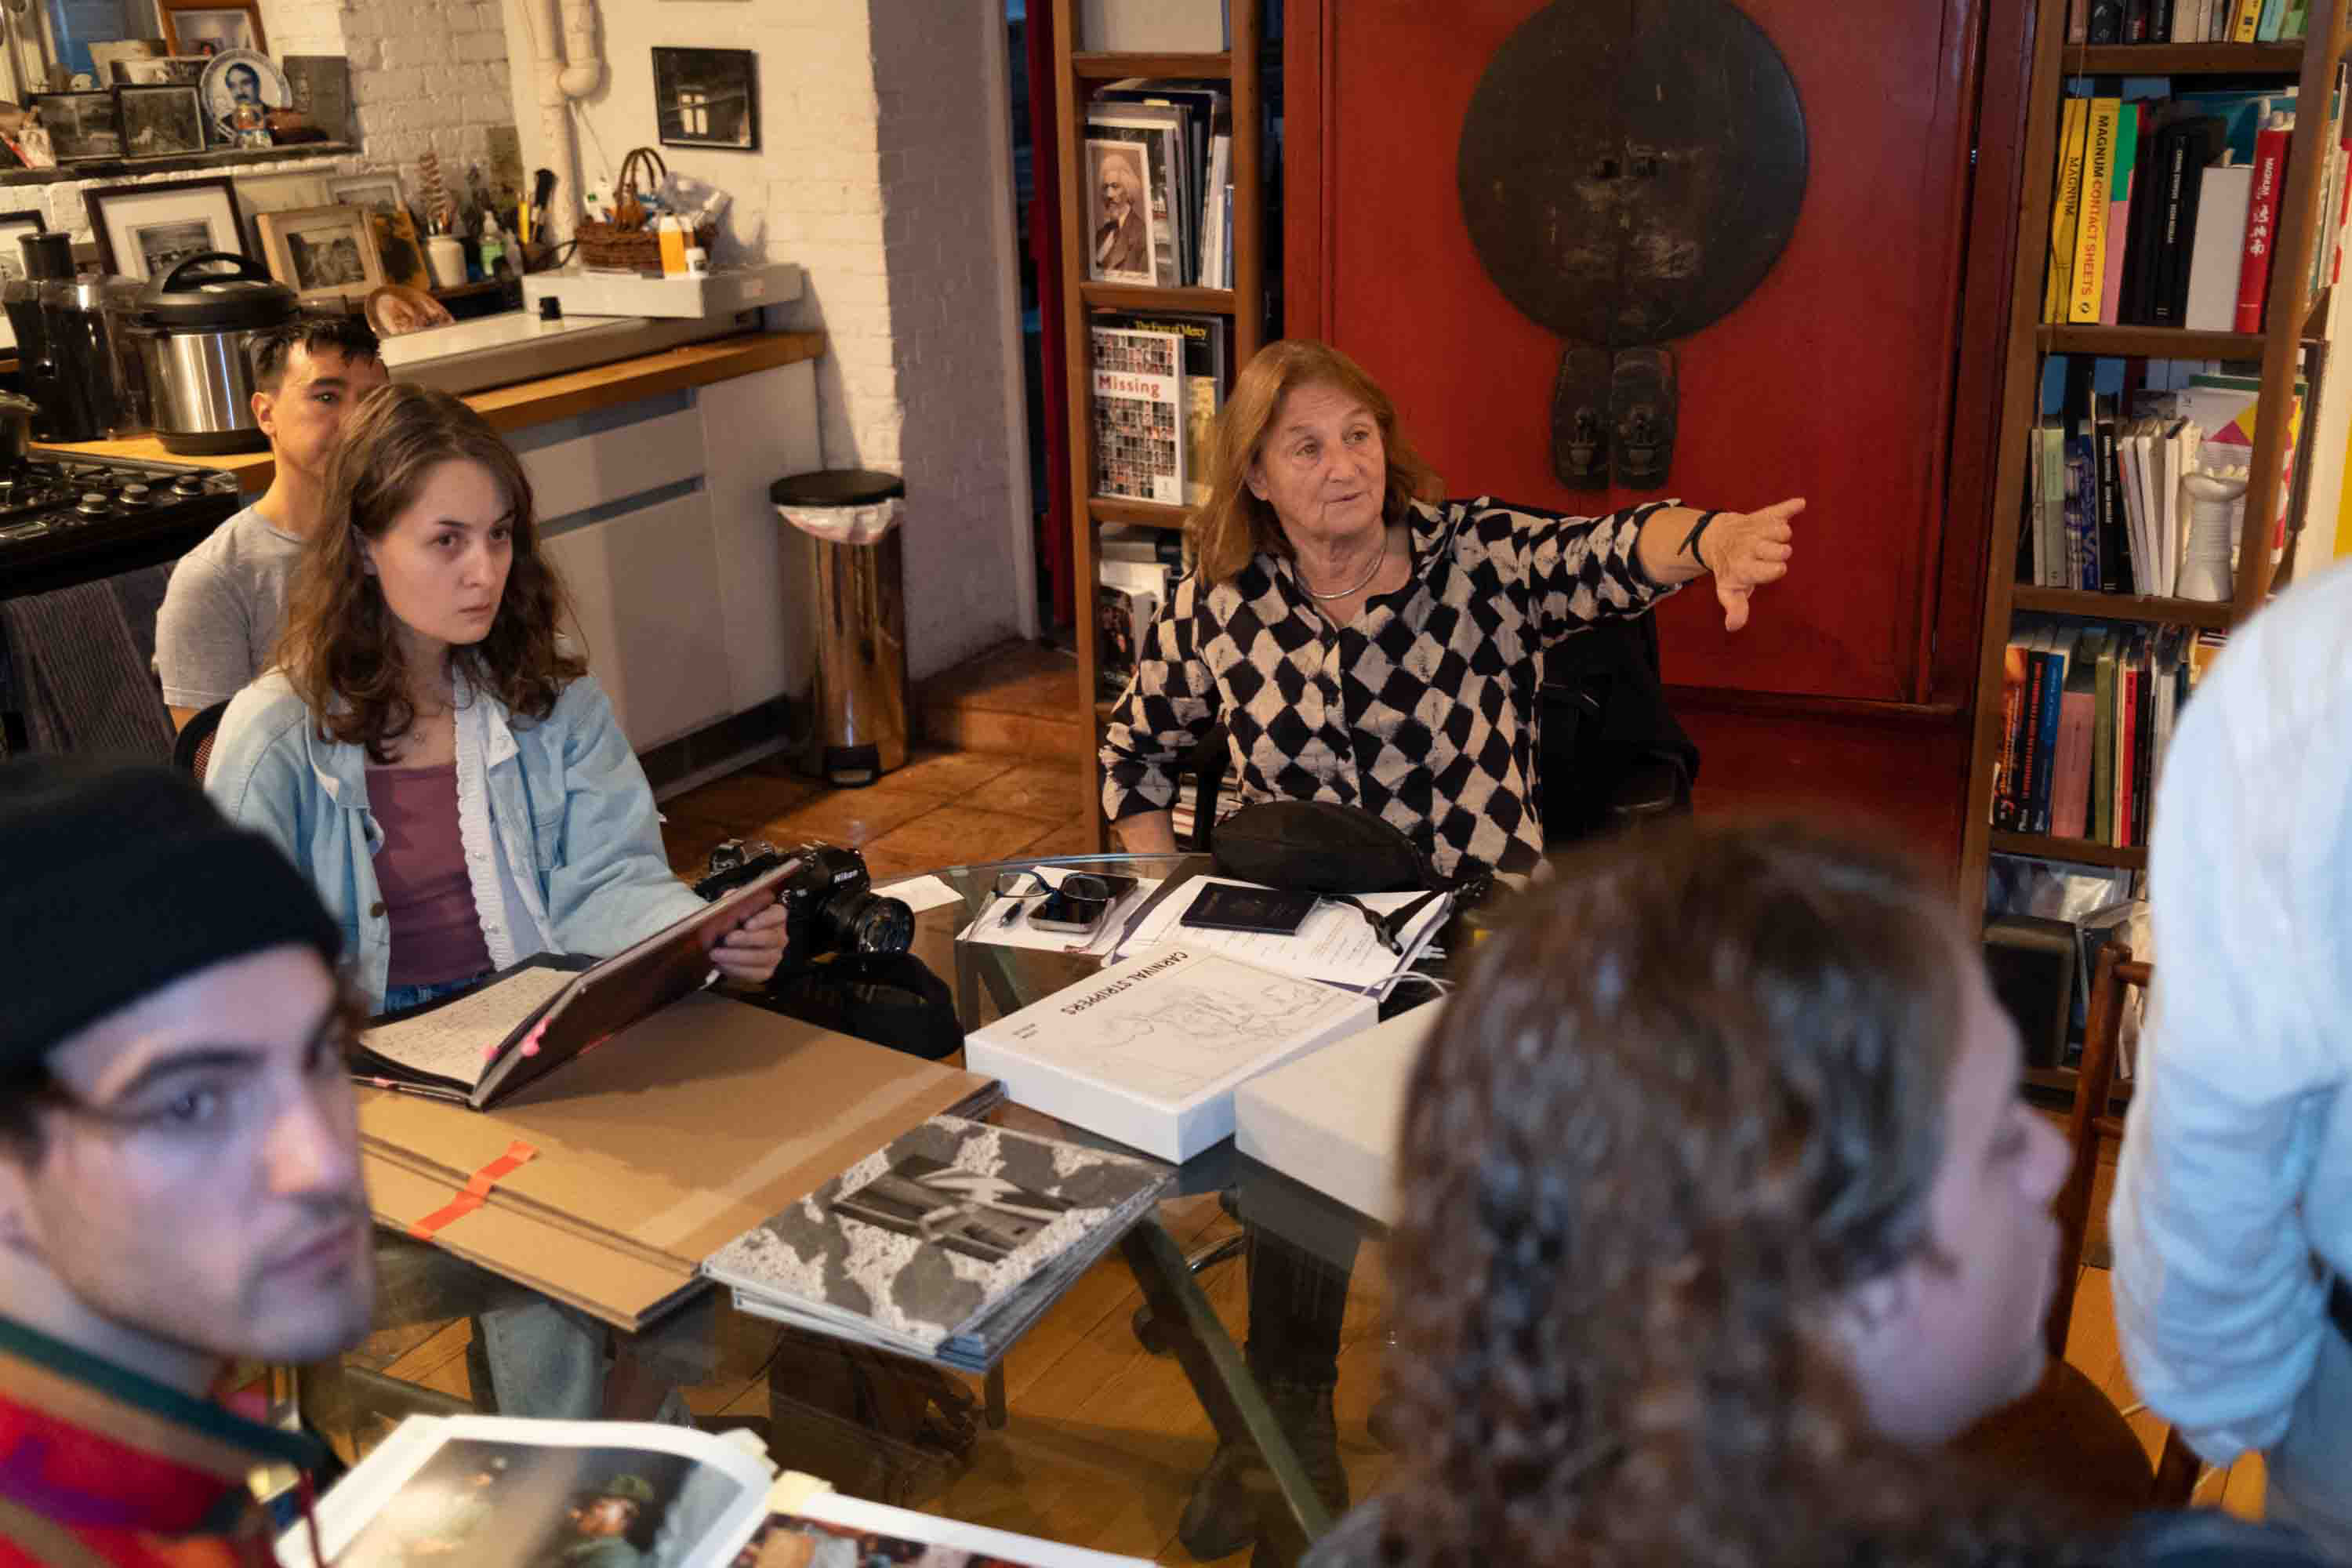 Legendary photojournalist Susan Meiselas speaks with a group of RIT photography students in her home.